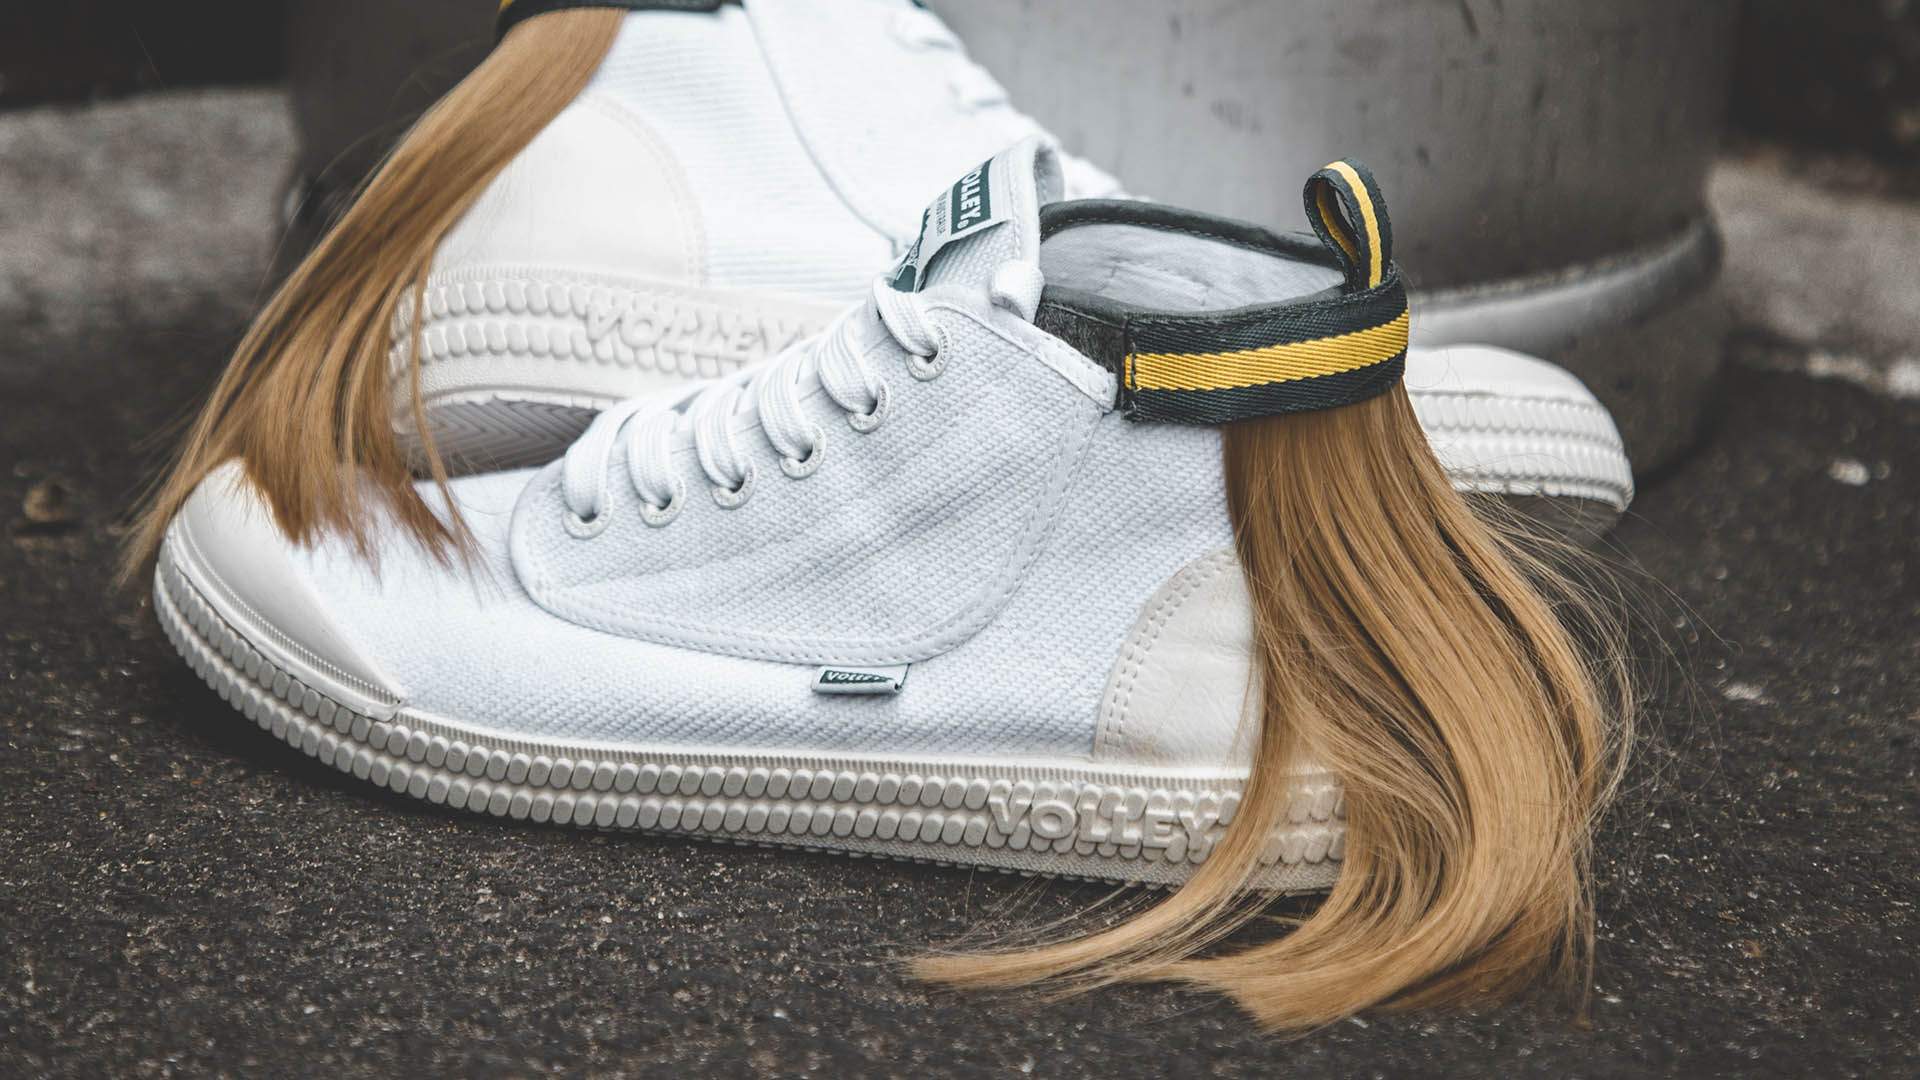 Exclamation point Clothes Archeological Business in the Front, Party in the Back: Volley Has Just Launched a Limited-Edition  Mullet Shoe - Concrete Playground